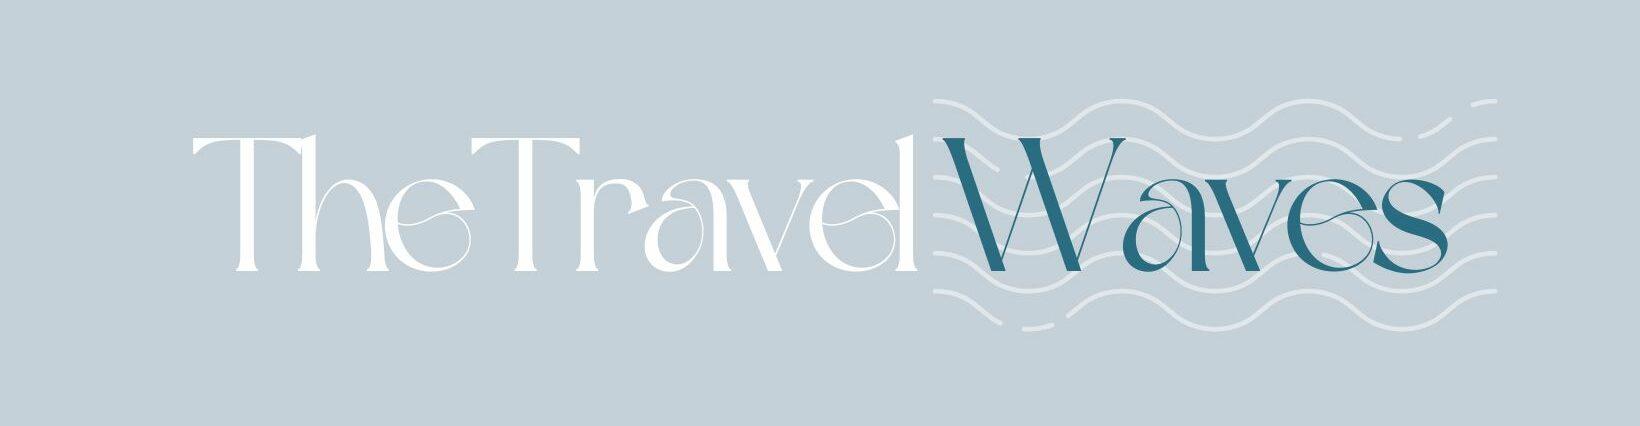 THE TRAVEL WAVES